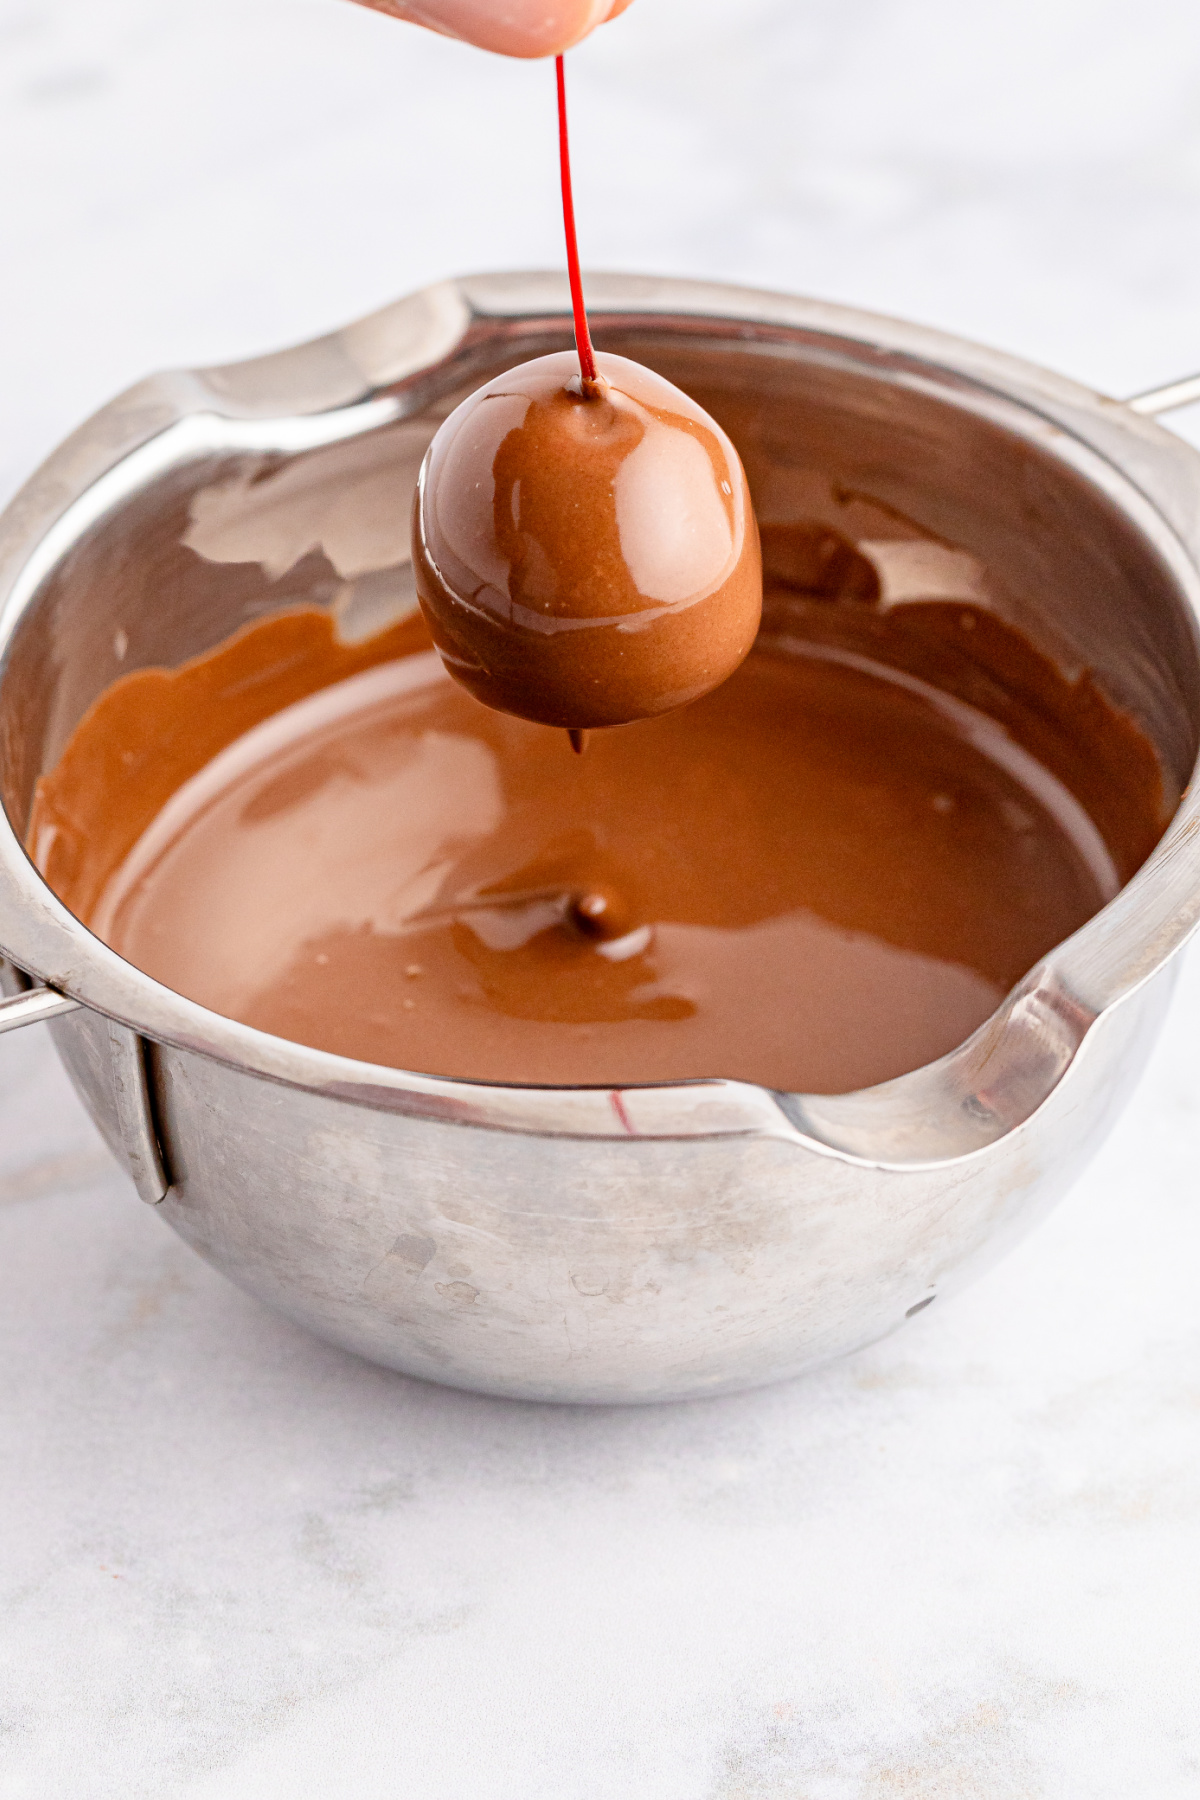 A person is holding a chocolate covered cherry over a pan.